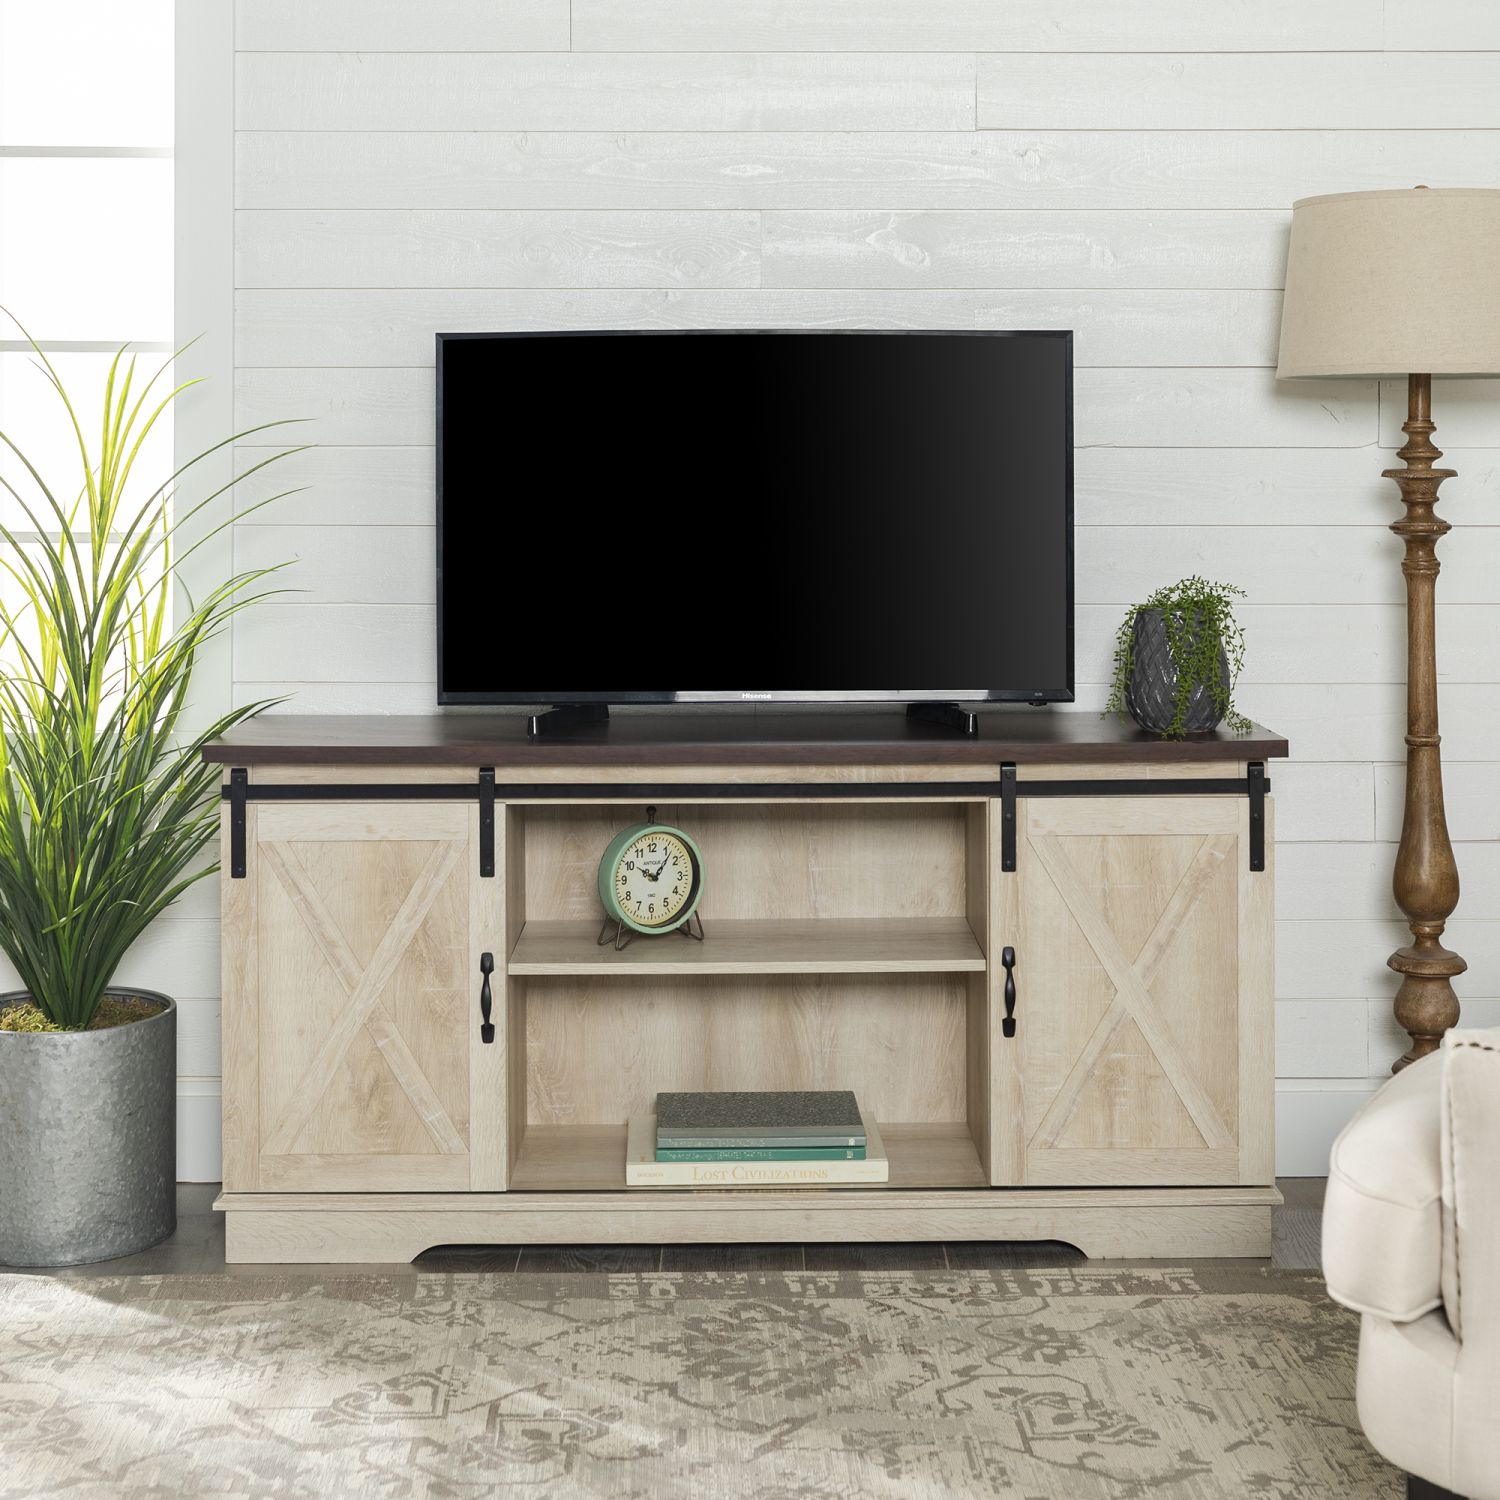 Manor Park Barn Door Tv Stand For Tvs Up To 65 In Regarding Modern Farmhouse Style 58" Tv Stands With Sliding Barn Door (View 8 of 15)